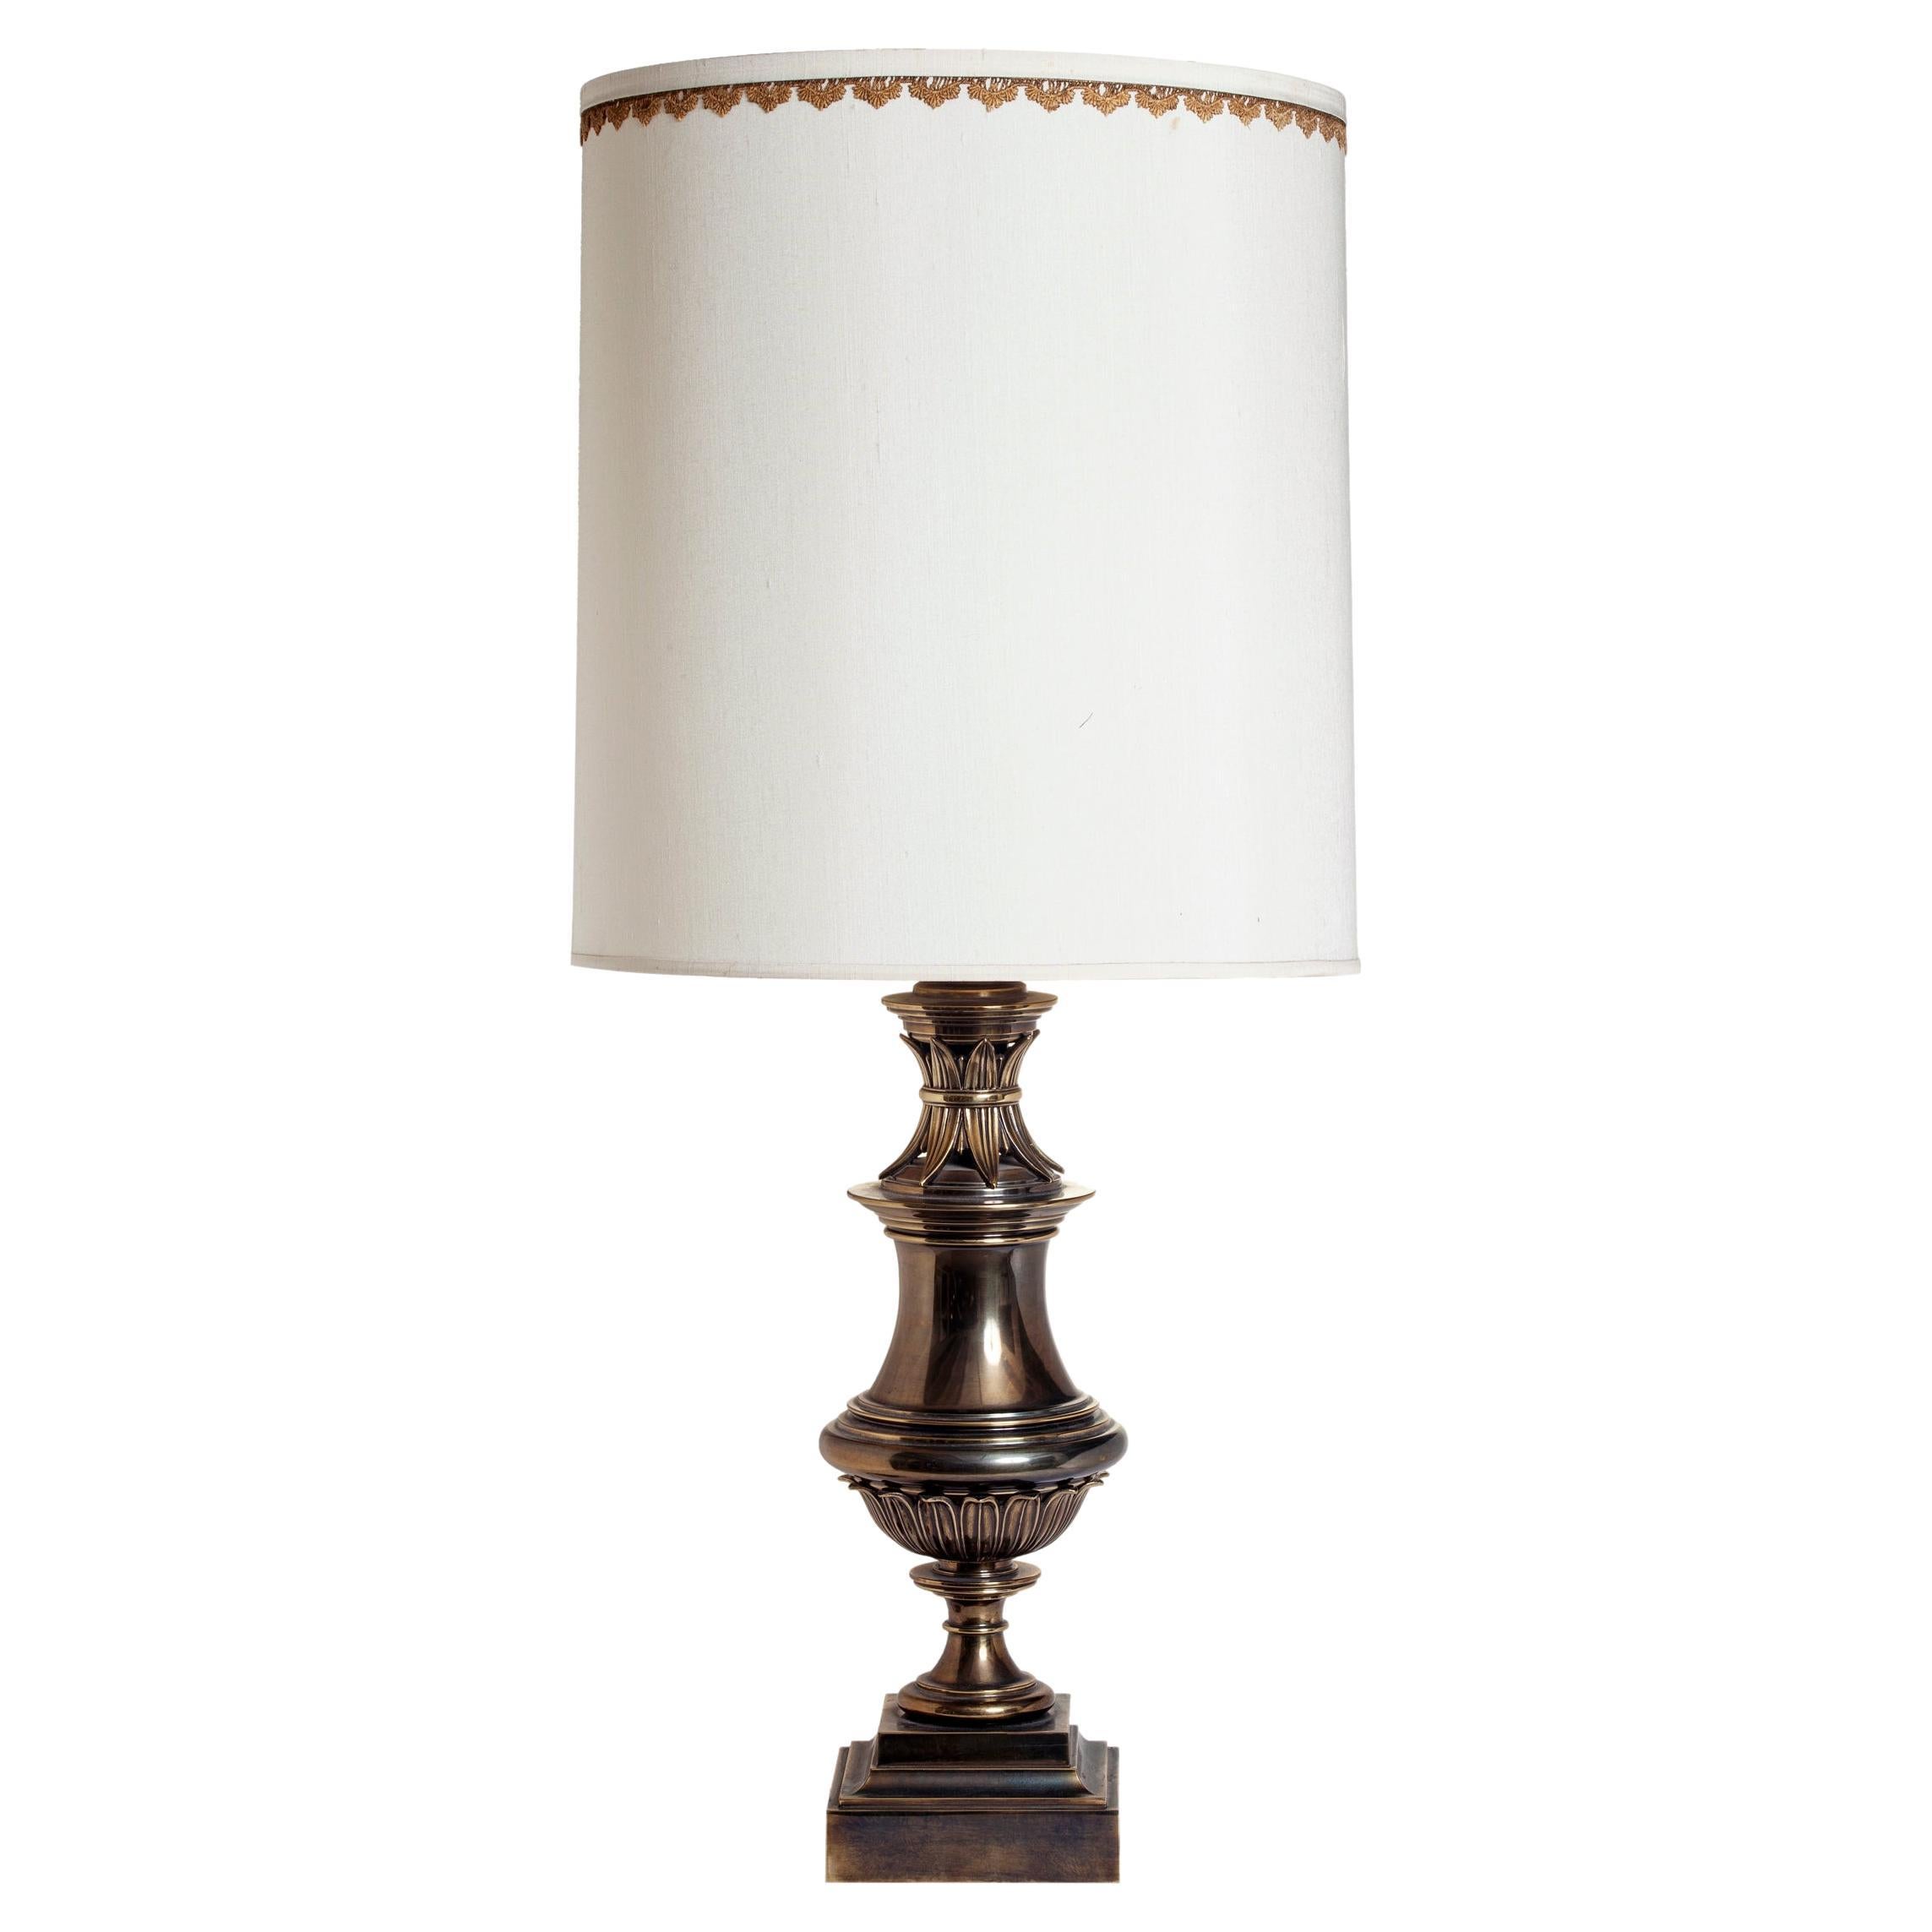 A stylish midcentury brass urn lamp by Stiffel with the original shade.